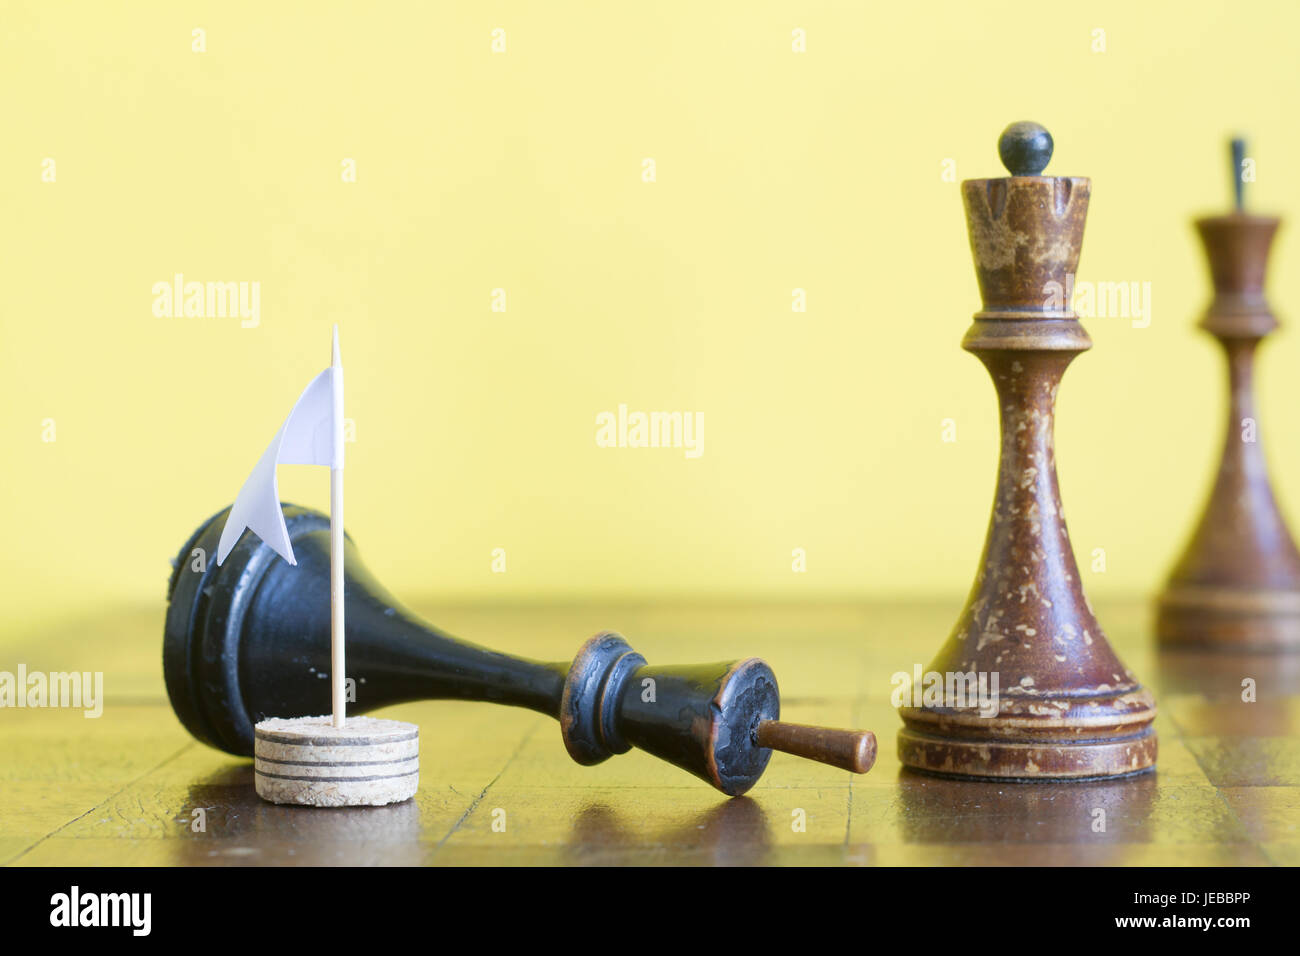 Ancient wooden chess pieces on an old chessboard Stock Photo - Alamy